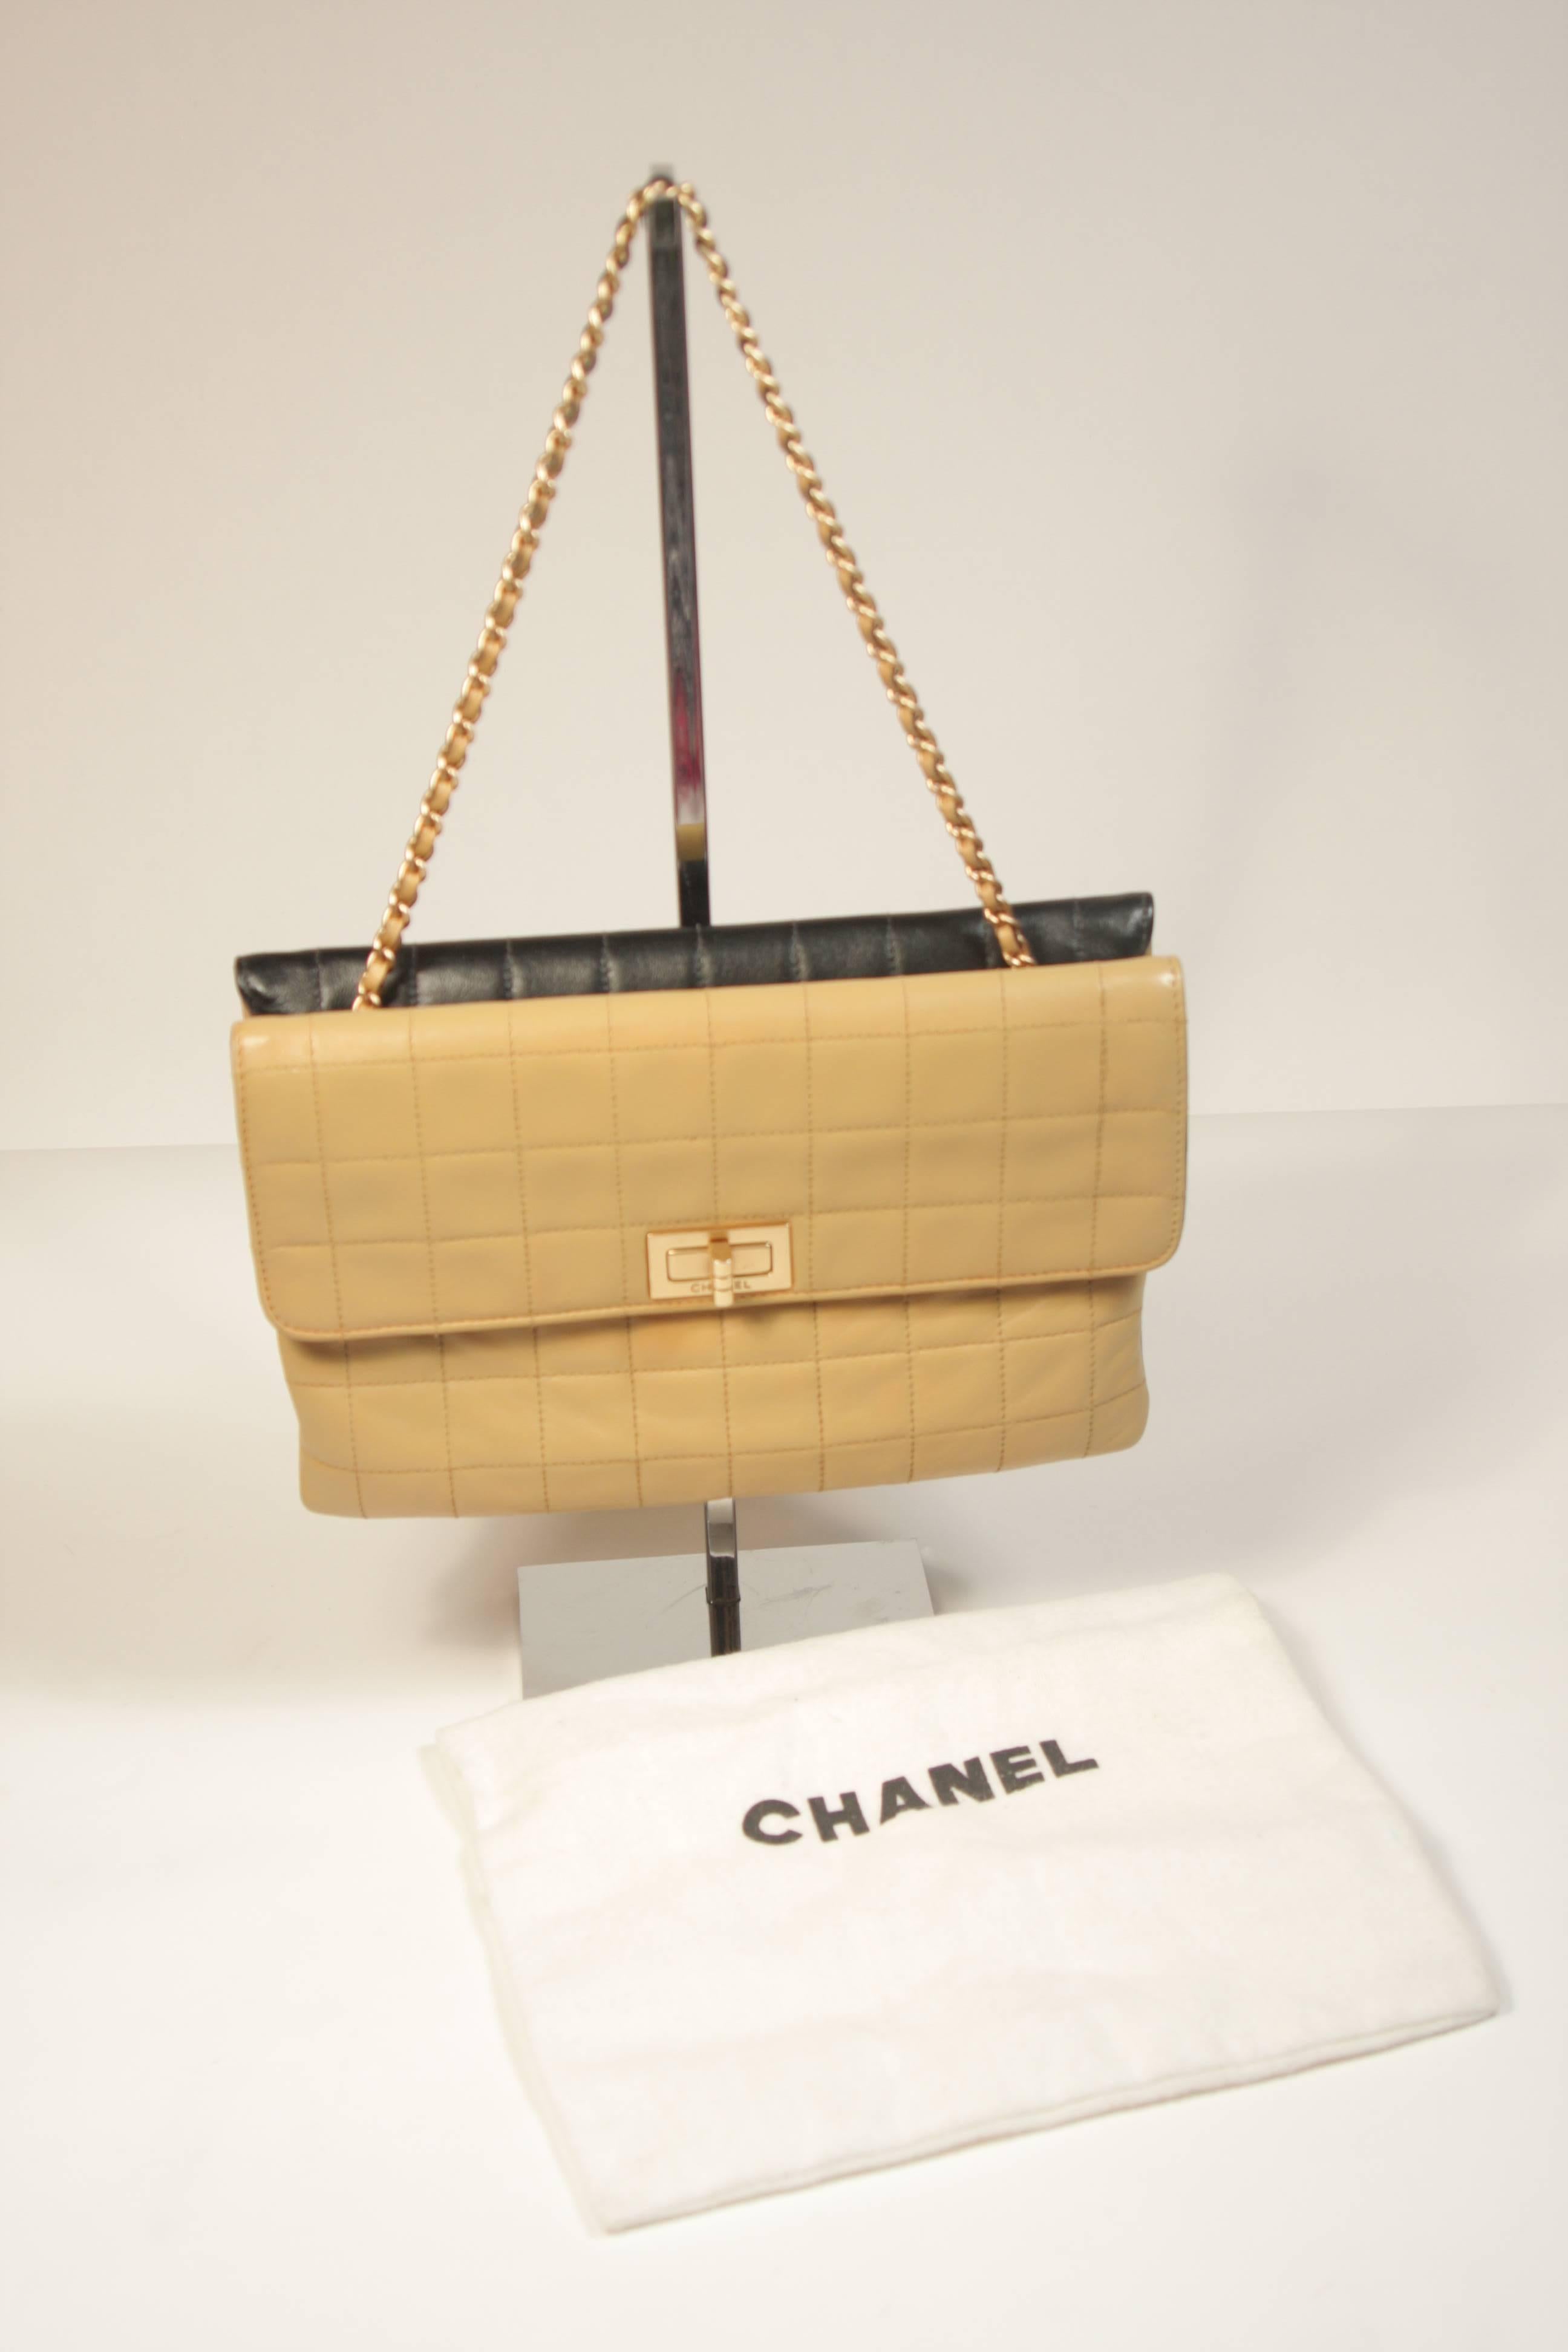 This Chanel handbag is composed of a cream and black lambskin leather with quilted design, this elegant flap features woven-in leather chain straps, exterior back pocket and gold-tone turn-lock closure. Comes with sleeper bag. In excellent